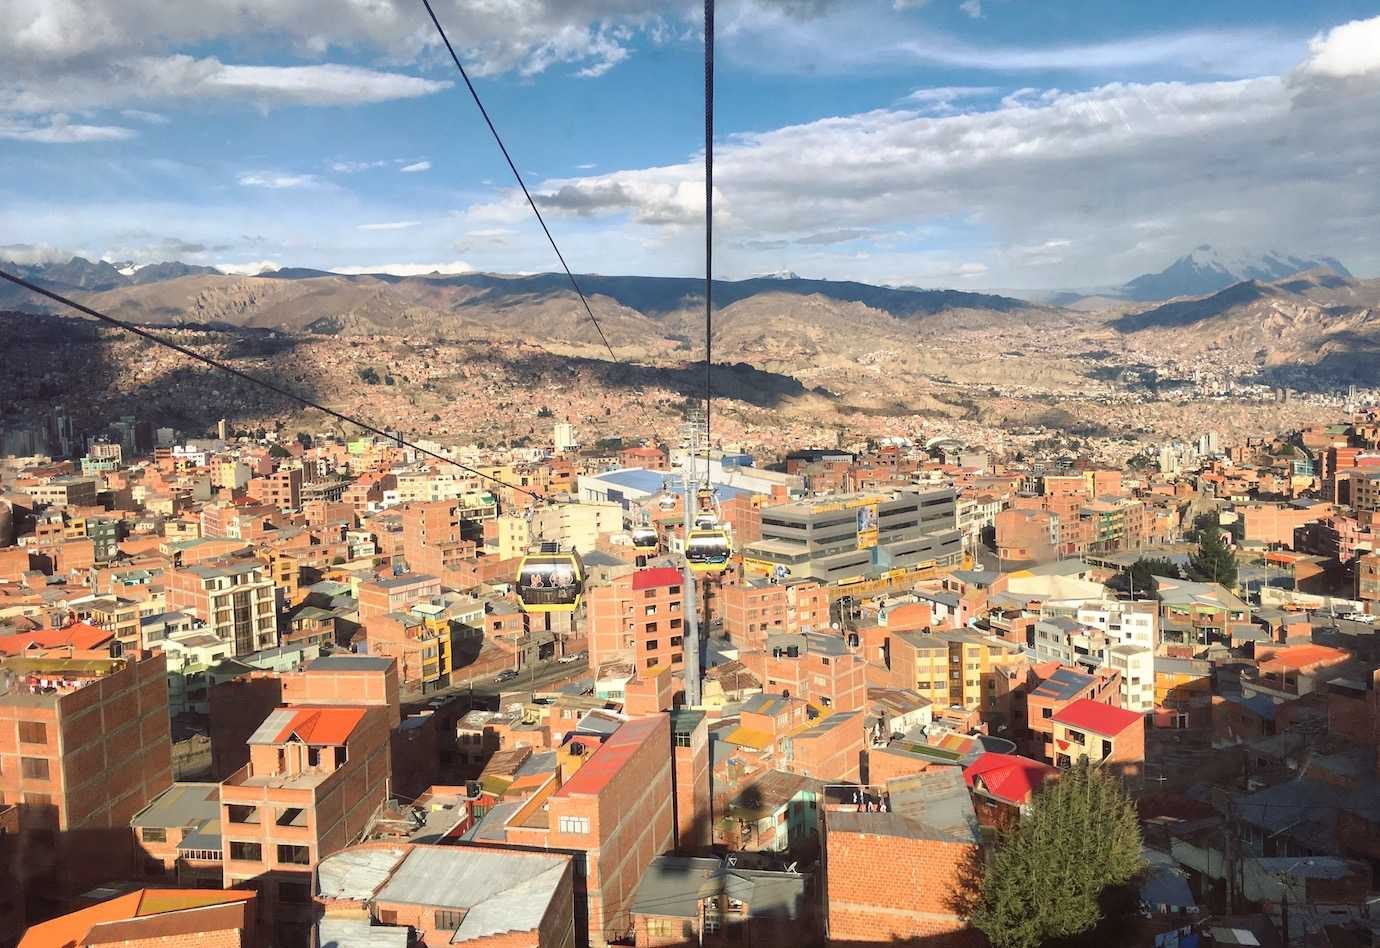 When in La Paz – 8 Things to do